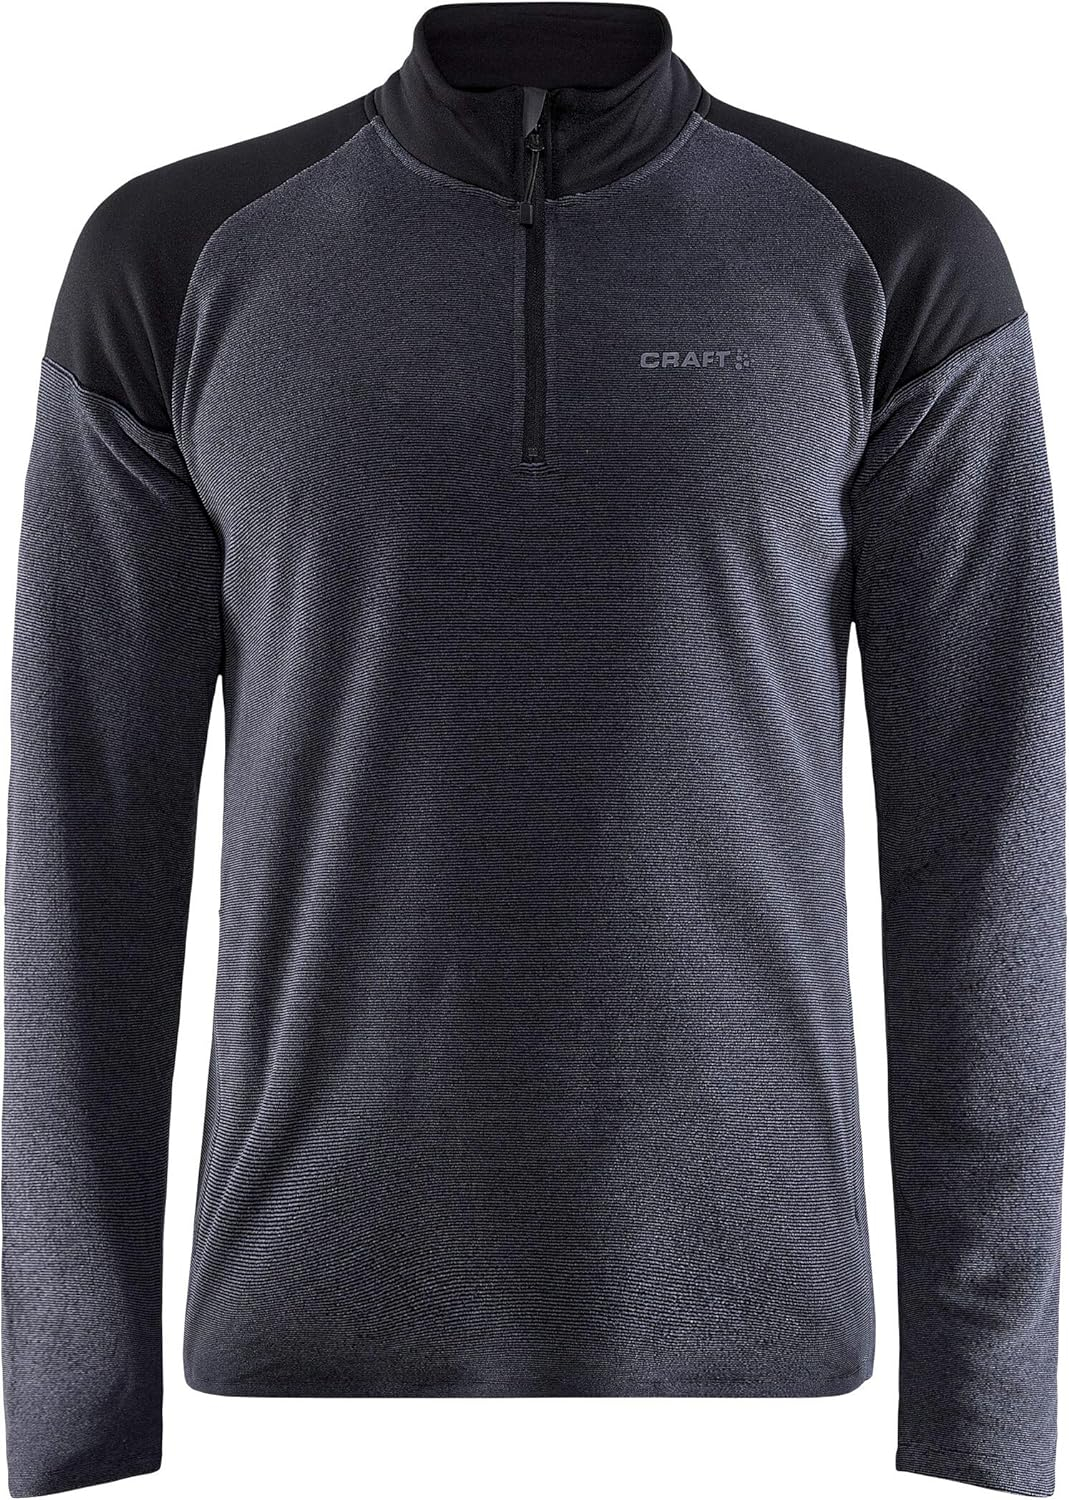 Craft Sportswear Mens CORE Edge Thermal Midlayer, Athletic Half Zip Pullover for Running, Skiing,  Cold Weather Sports